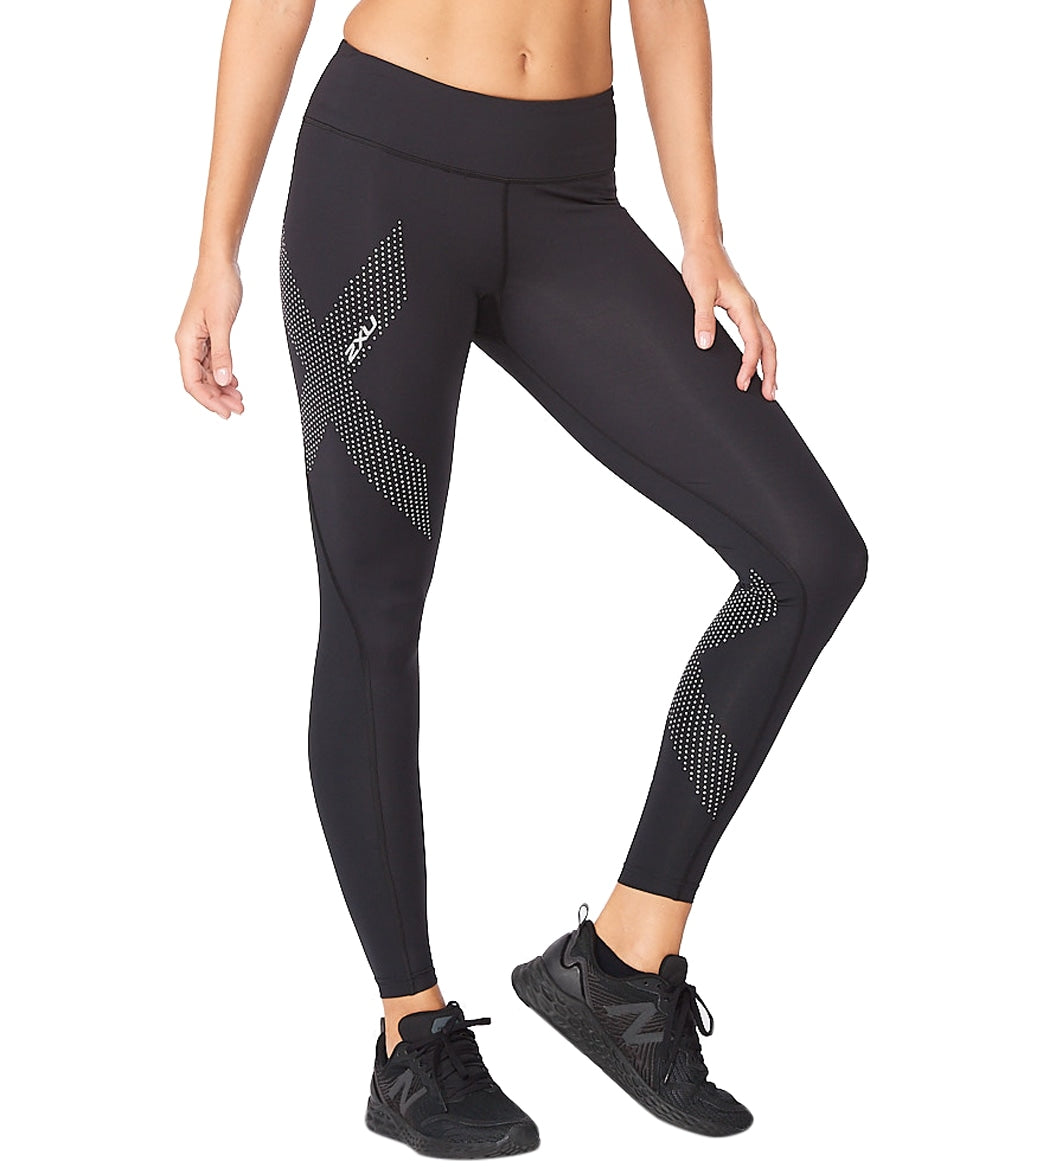 2XU Women's Mid Rise Compression Tights at